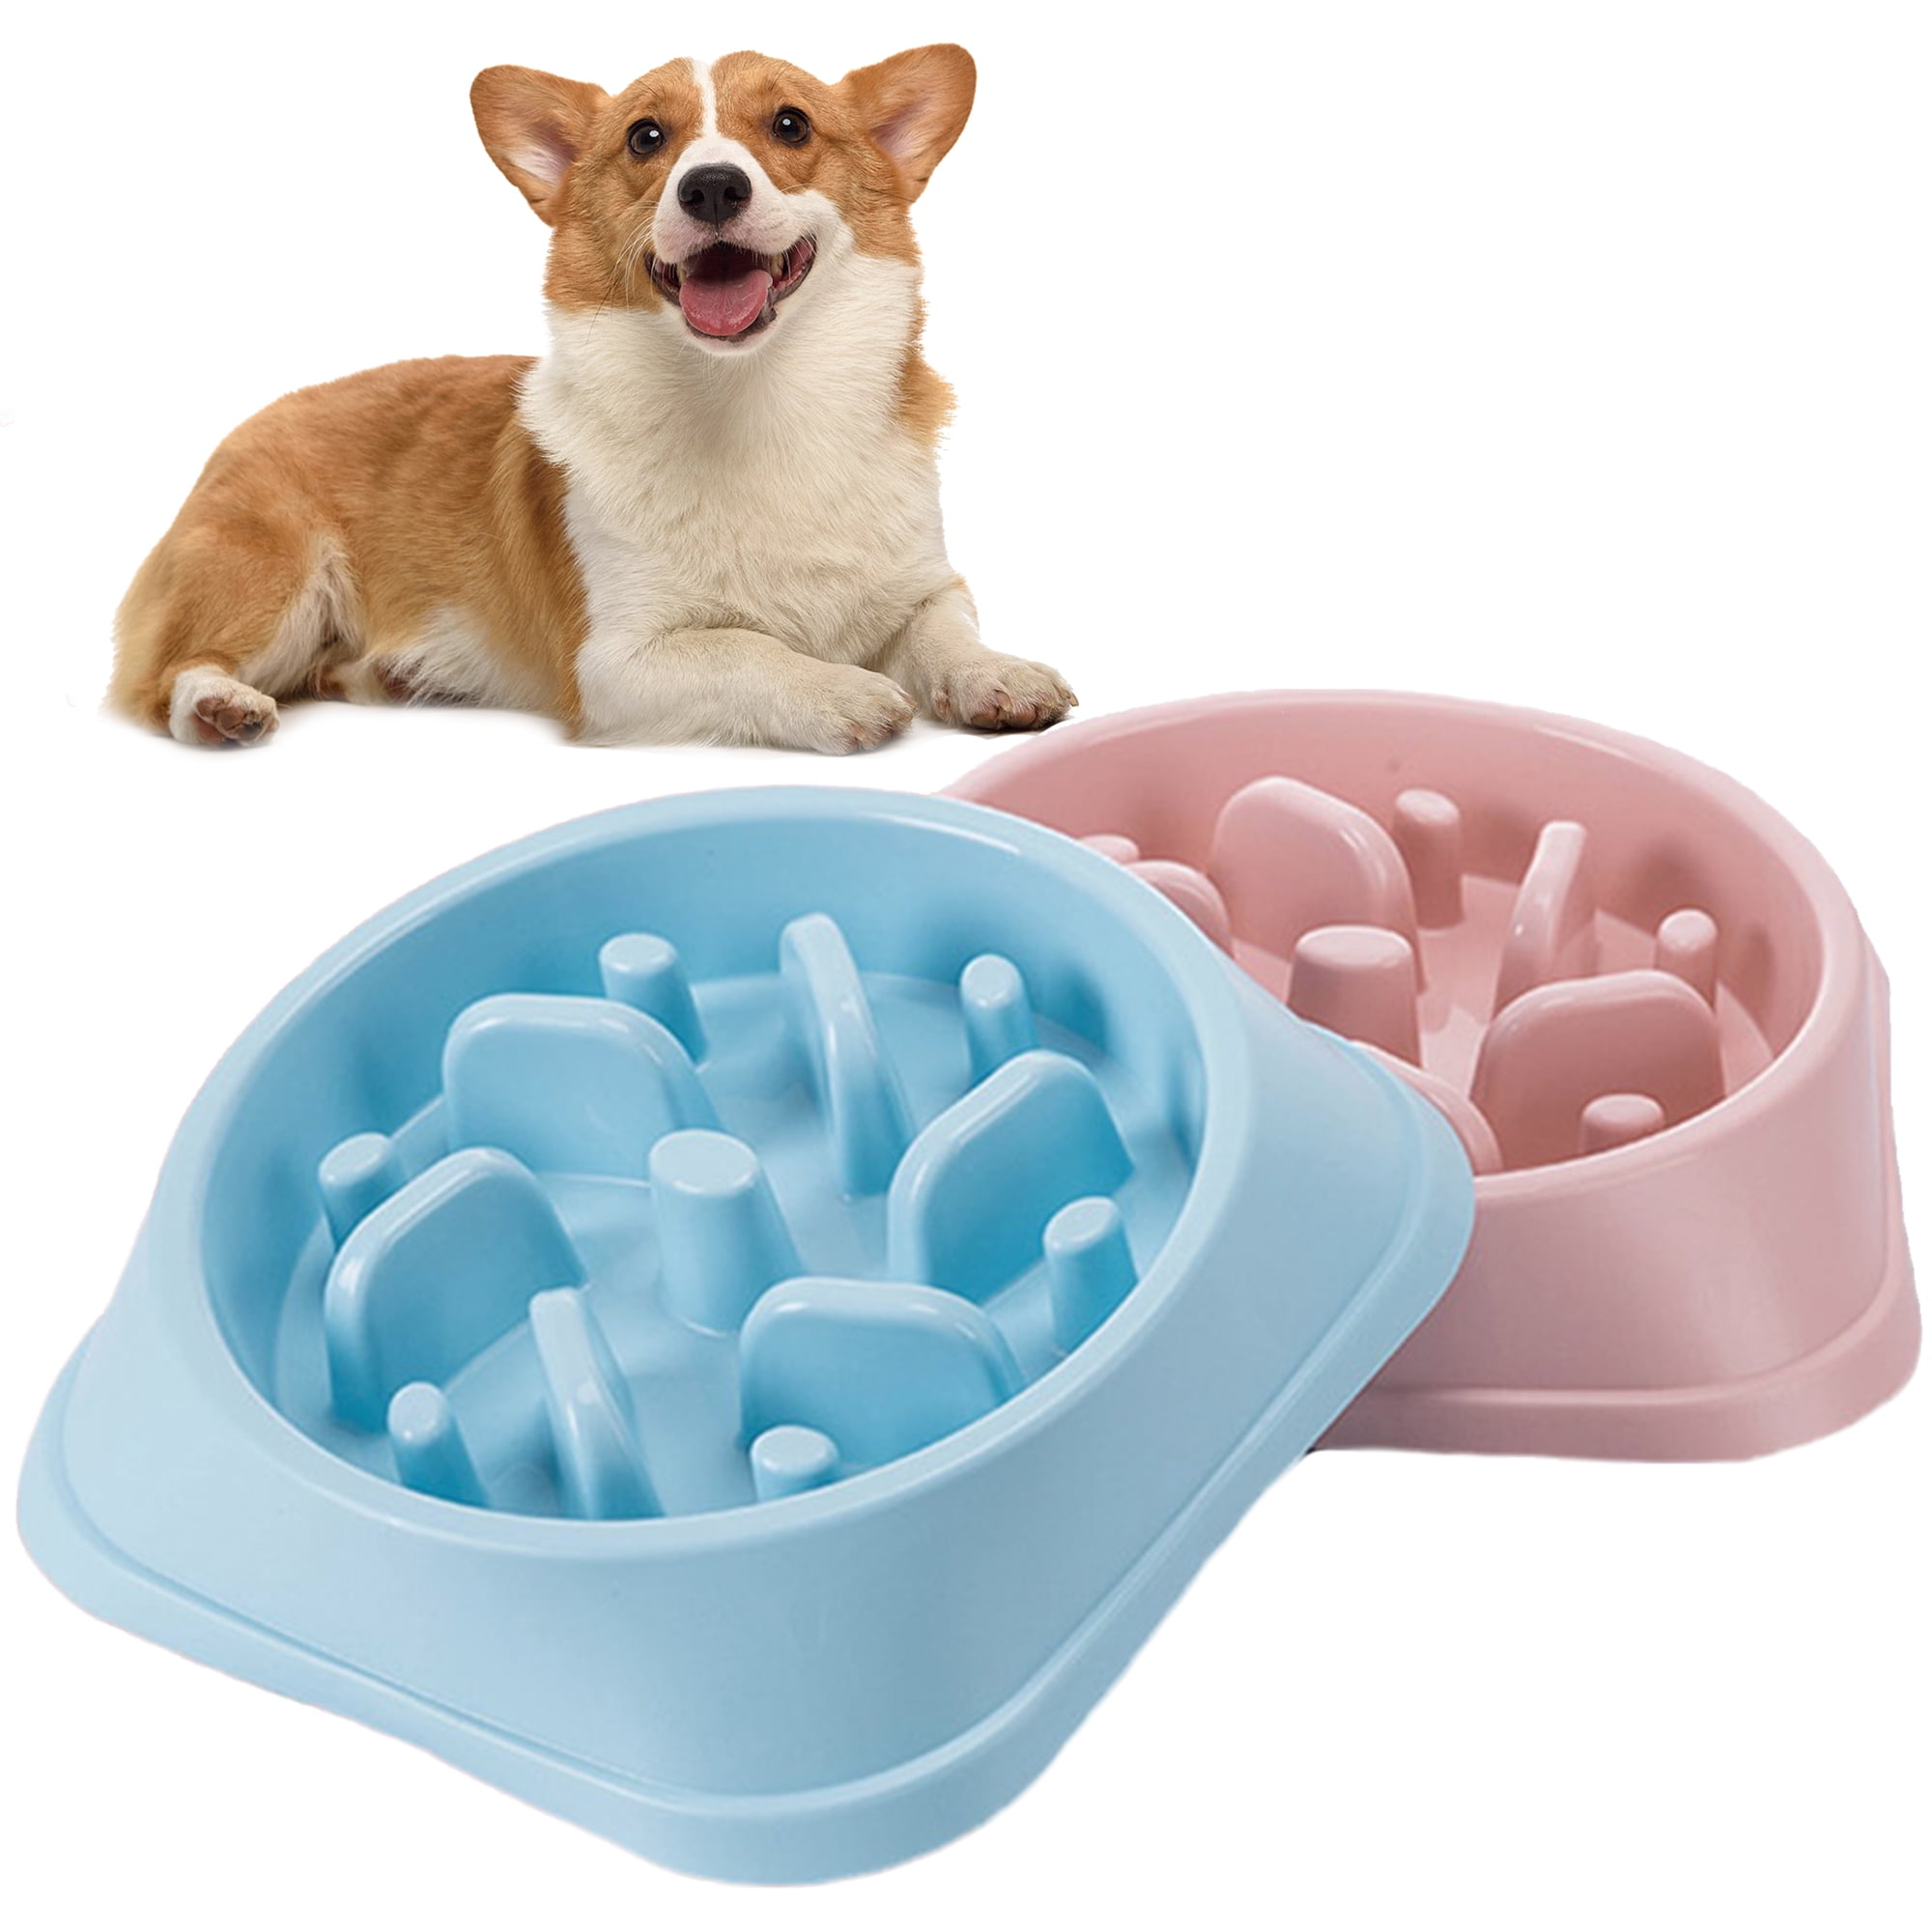 Puzzle Feeder Dog Bowl, Blue, 9.8 in Licking Area, BPA-Free, Anti-Slip,  Reduces Anxiety, Accommodates Multiple Food Types